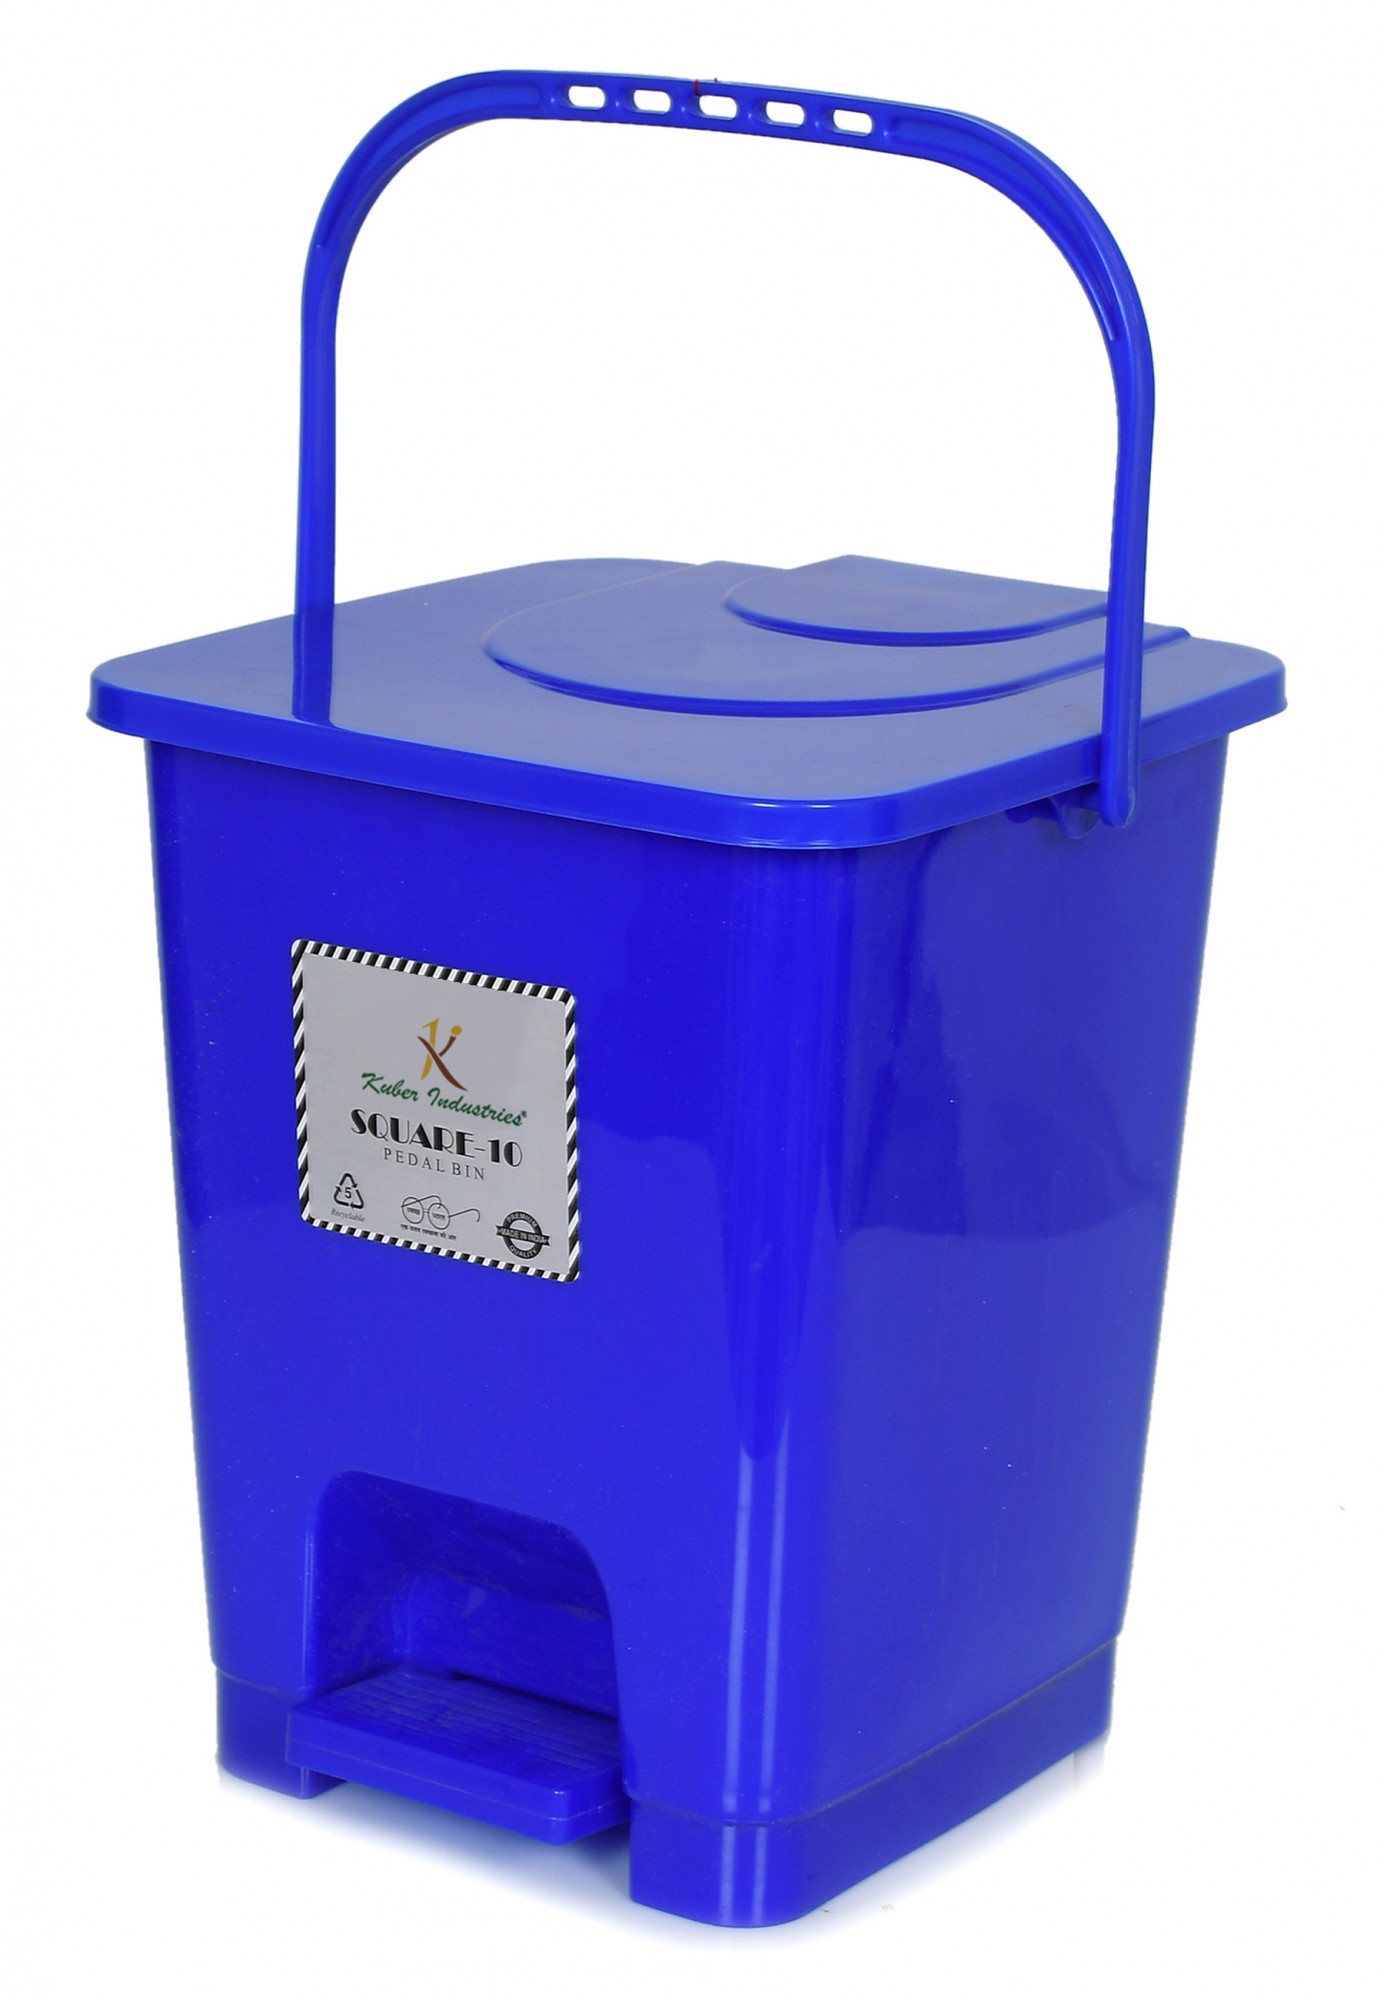 Kuber Industries Premium Plastic Pedal Dustbin 10 Ltr (Red & Yellow & Blue)-Pack of 3